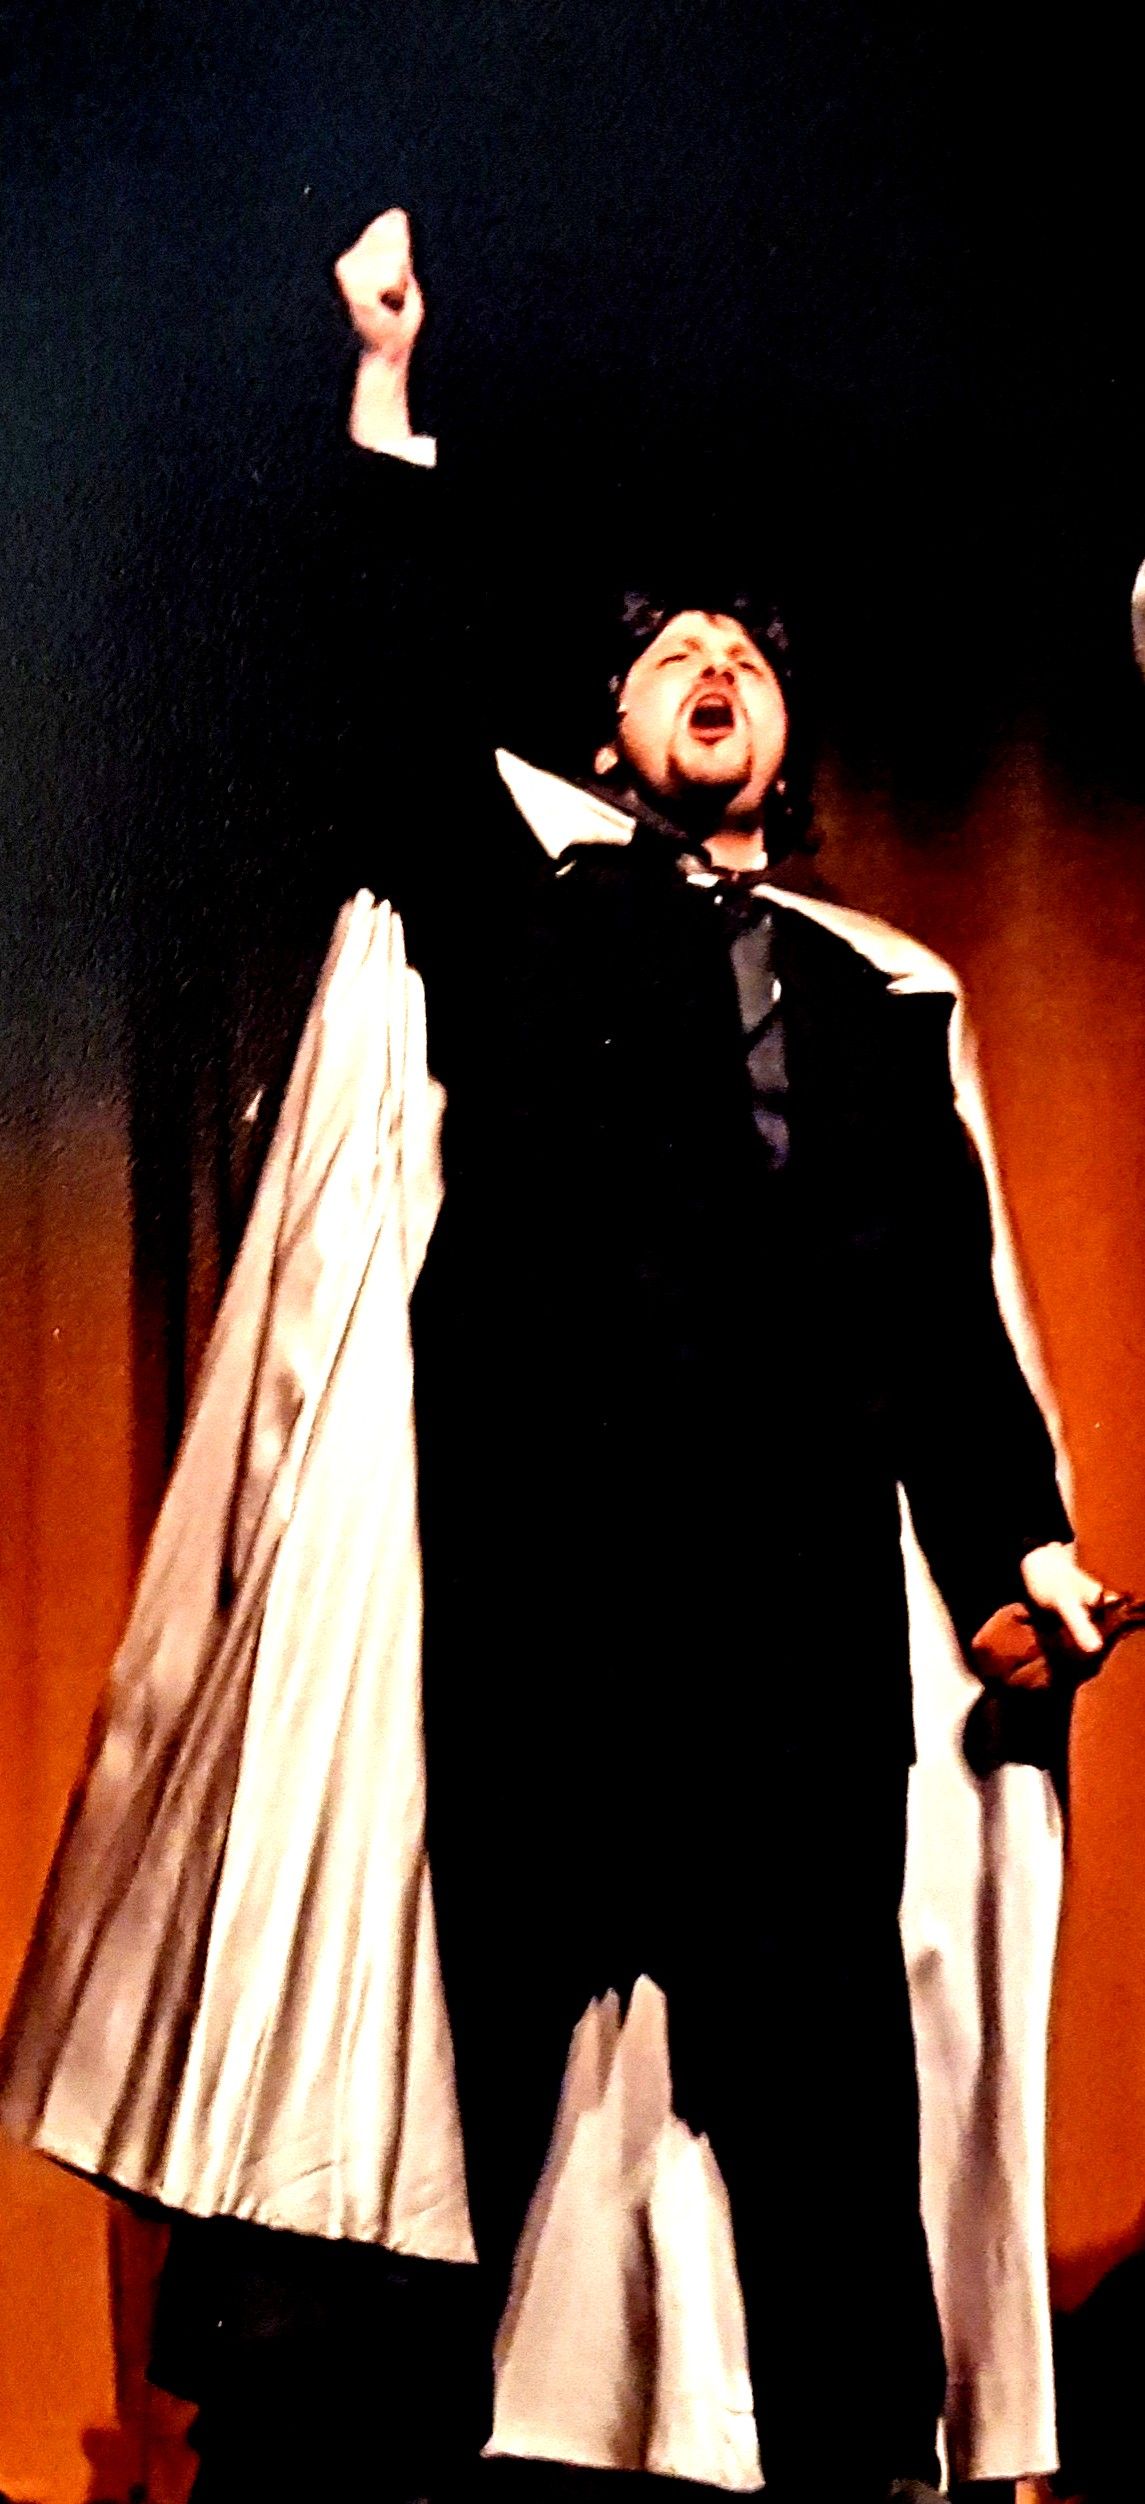 Philip Paul Kelly performing as Monsieur D'Arque in "Beauty and the Beast the Musical."